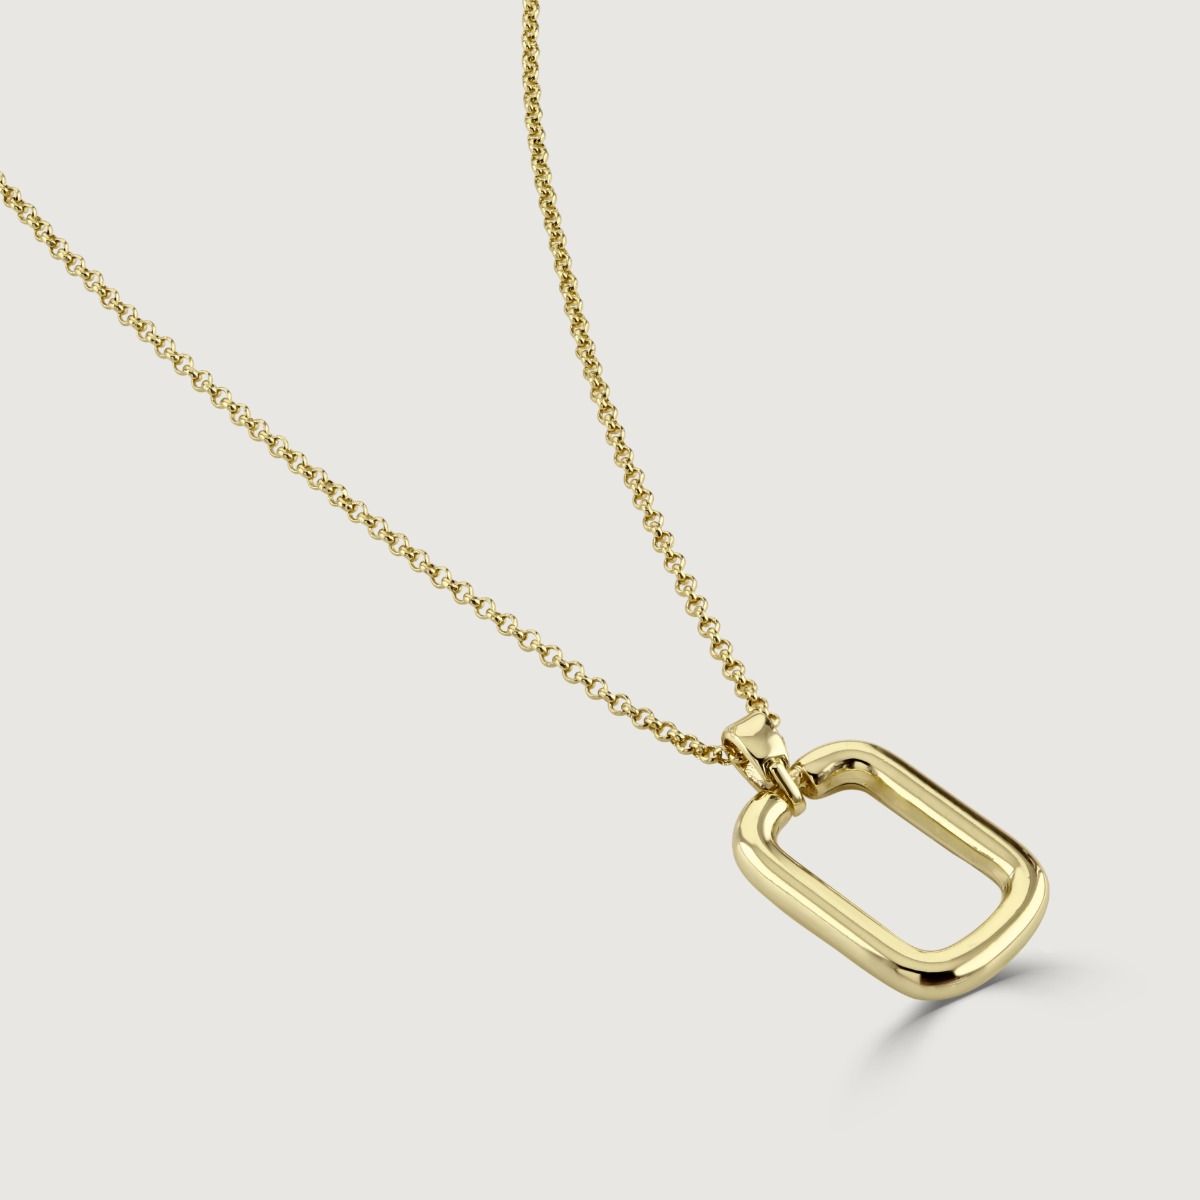 The Rectangle Polished Gold Hoop Pendant is a contemporary and sleek piece. With its polished gold finish and rectangular hoop design, this pendant exudes contemporary elegance. The geometric shape adds a touch of modernity. 